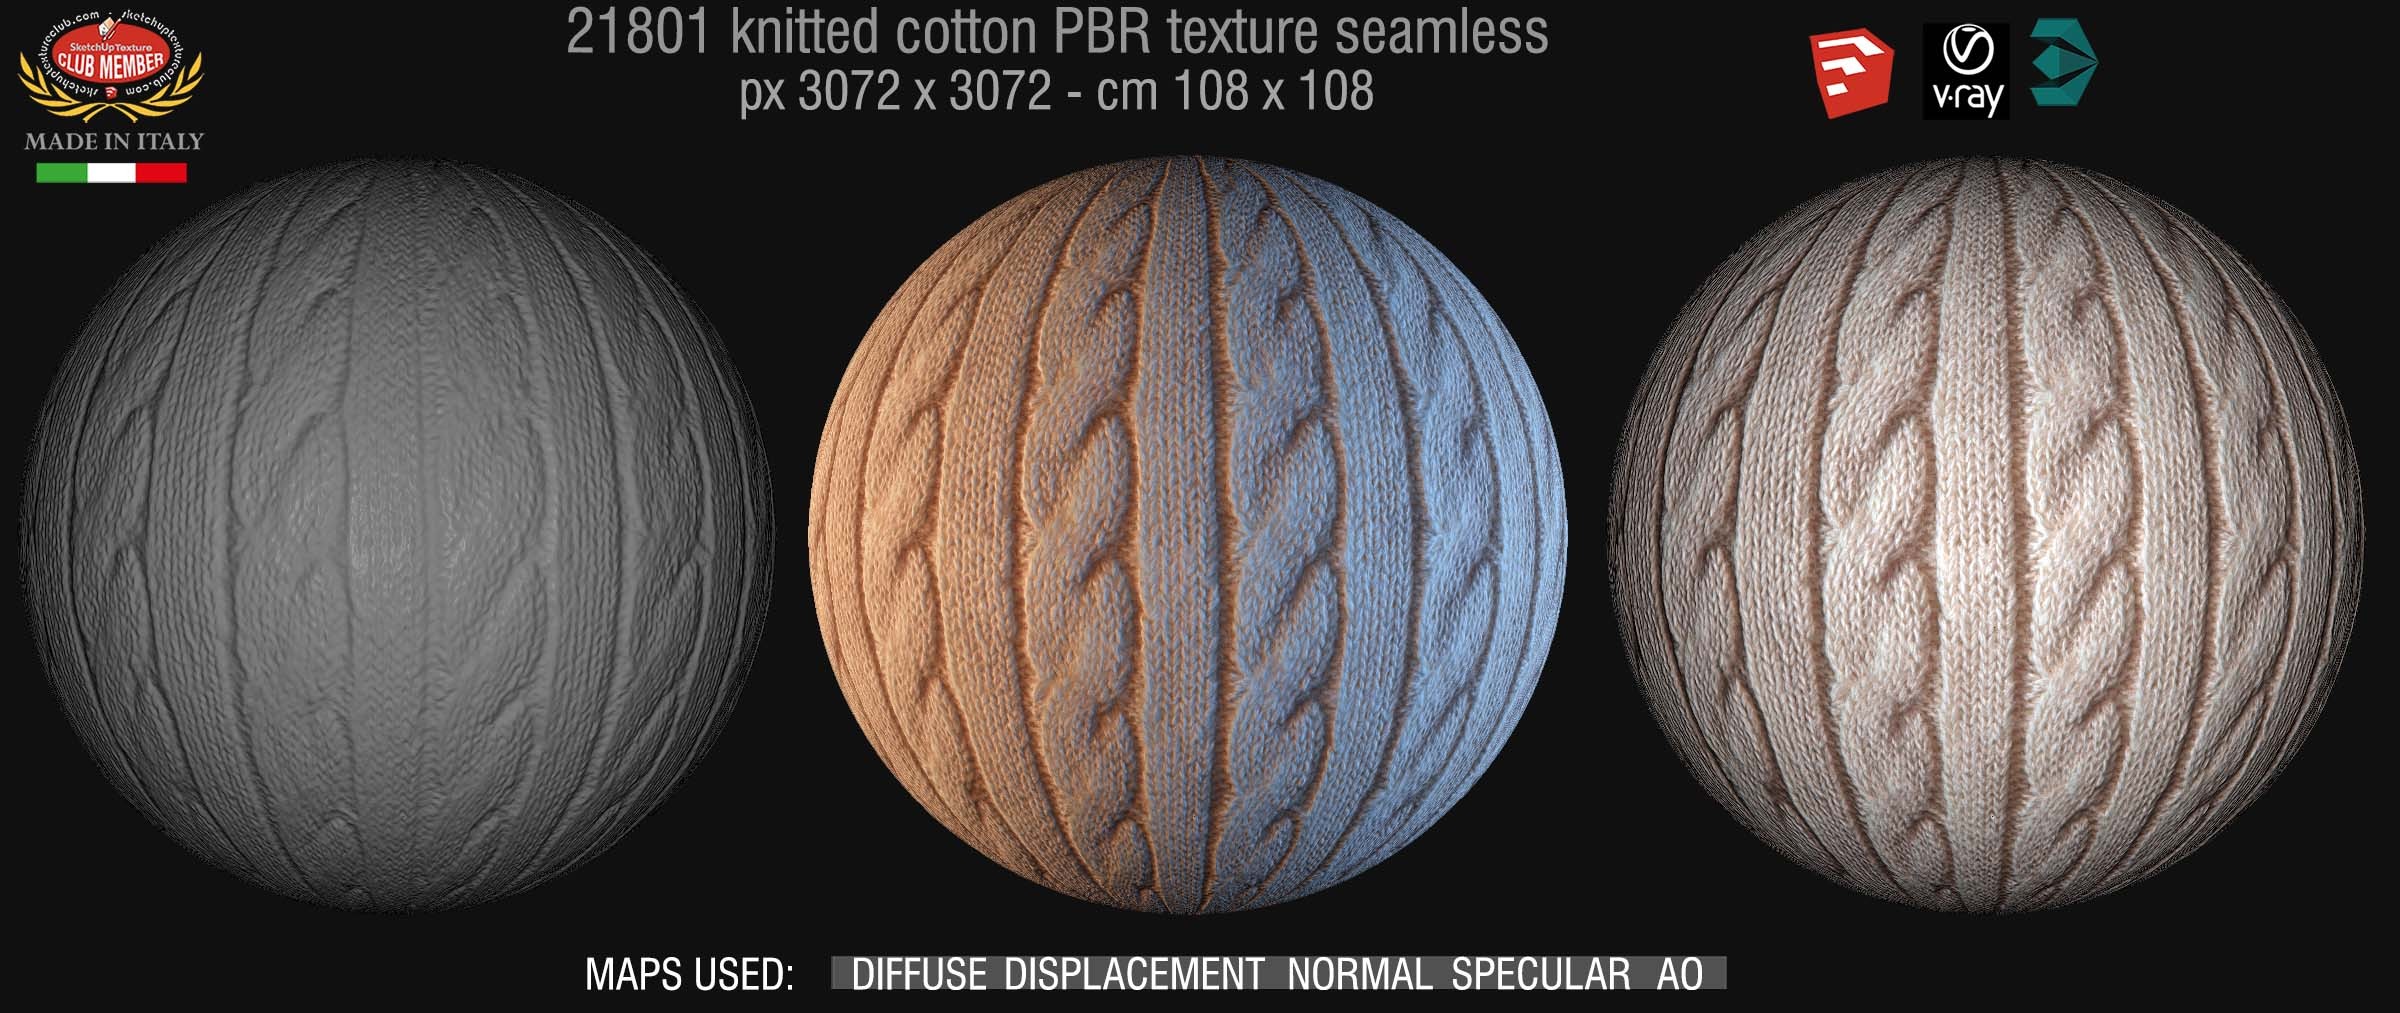 21801 wool knitted PBR texture seamless DEMO